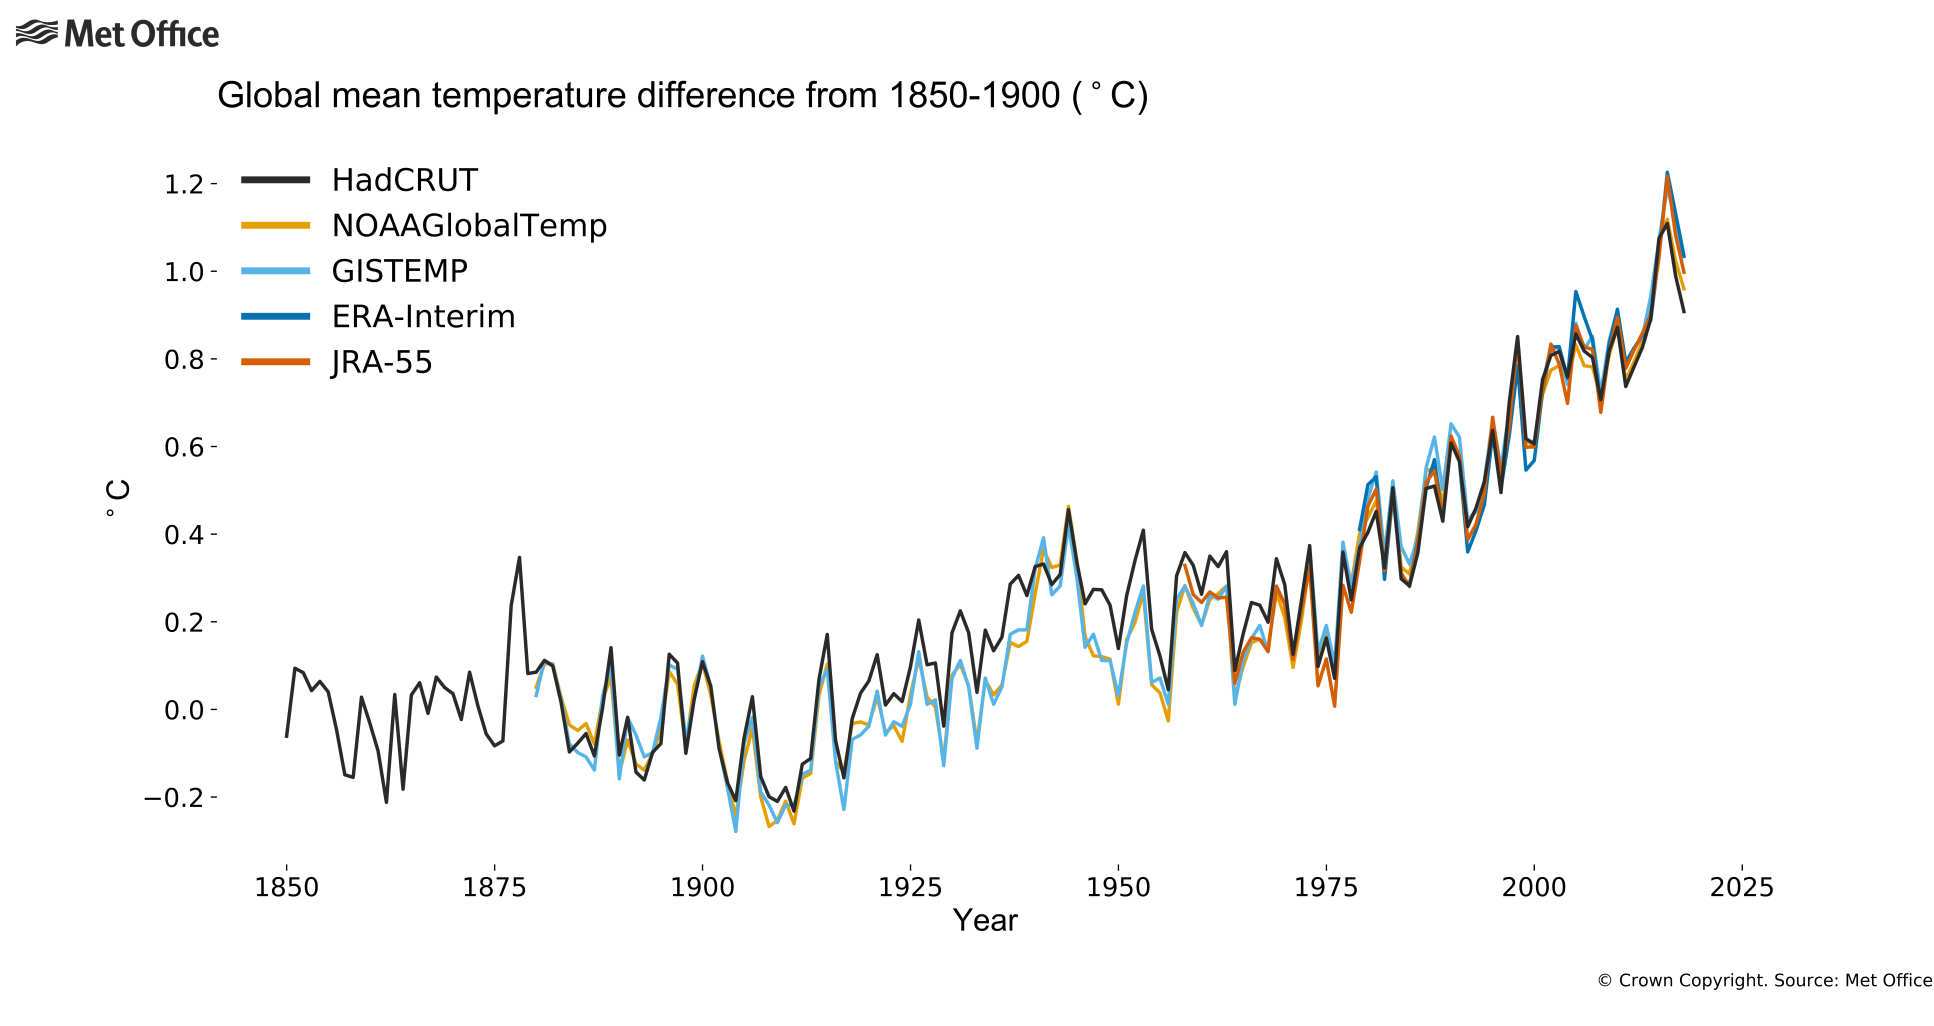 A graph showing the increase in global mean temperature since 1850-1900 levels until 2019. The graph clearly shows that global temperatures have increased over the last 150 years, causing global warming/